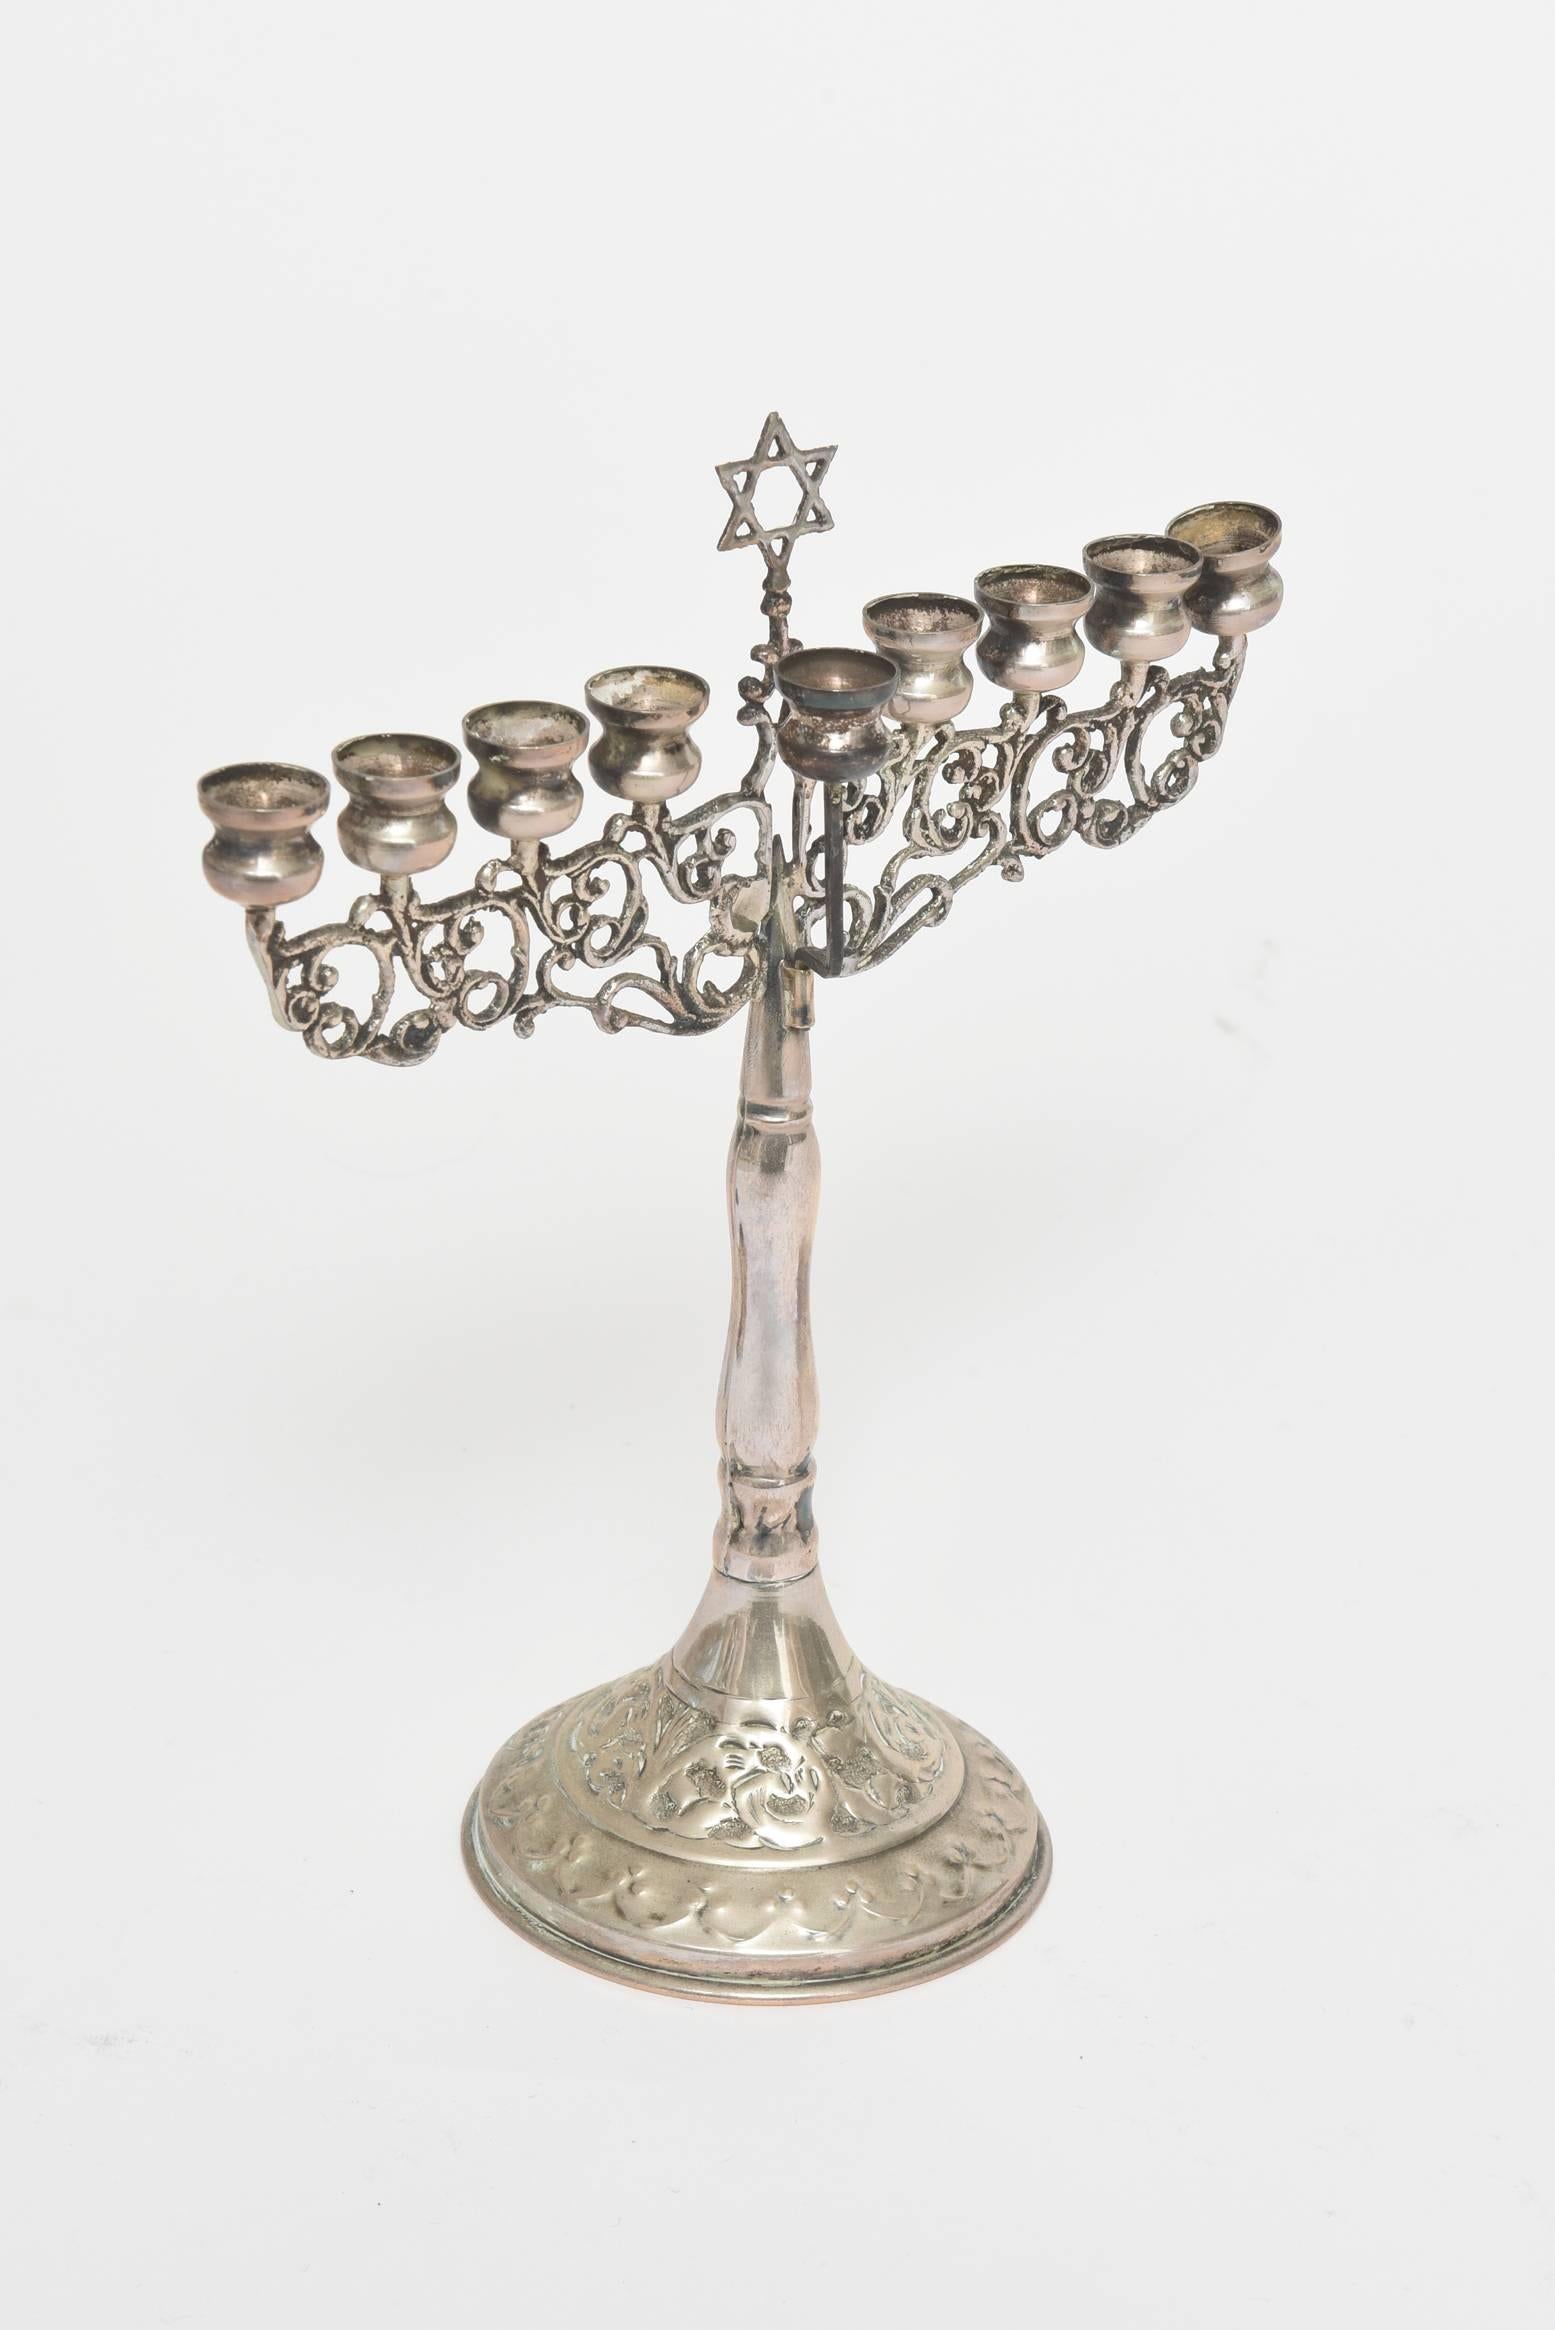 Beautiful raised decoration at base. Open work holding the candles and shamus with a Jewish star at the top. This late 19th century menorah has pierced support for the candles and repouse work on the base. 

Measure: Weight 3.30 troy Oz.